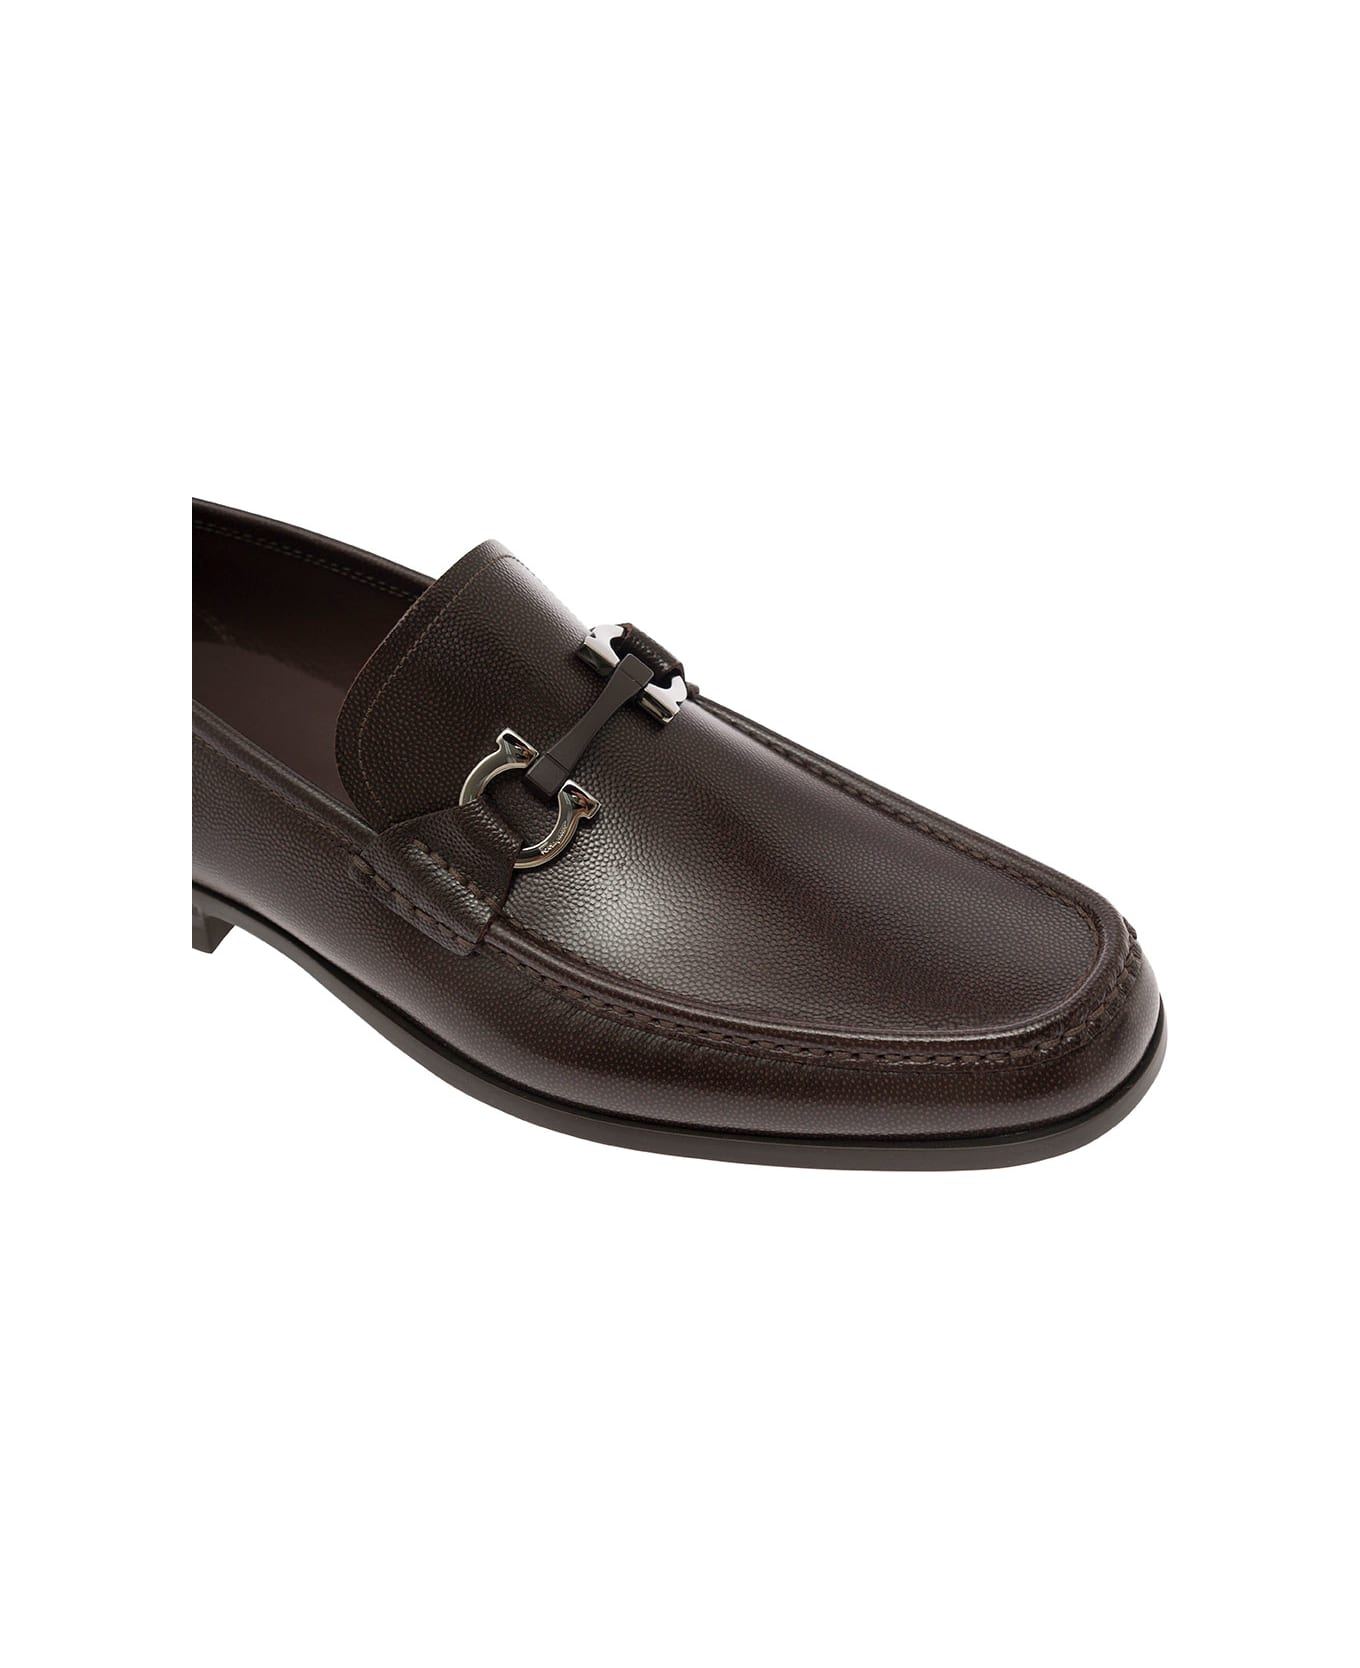 Ferragamo Brown Loafers Wih Gancini Detail In Leather Man - Brown ローファー＆デッキシューズ